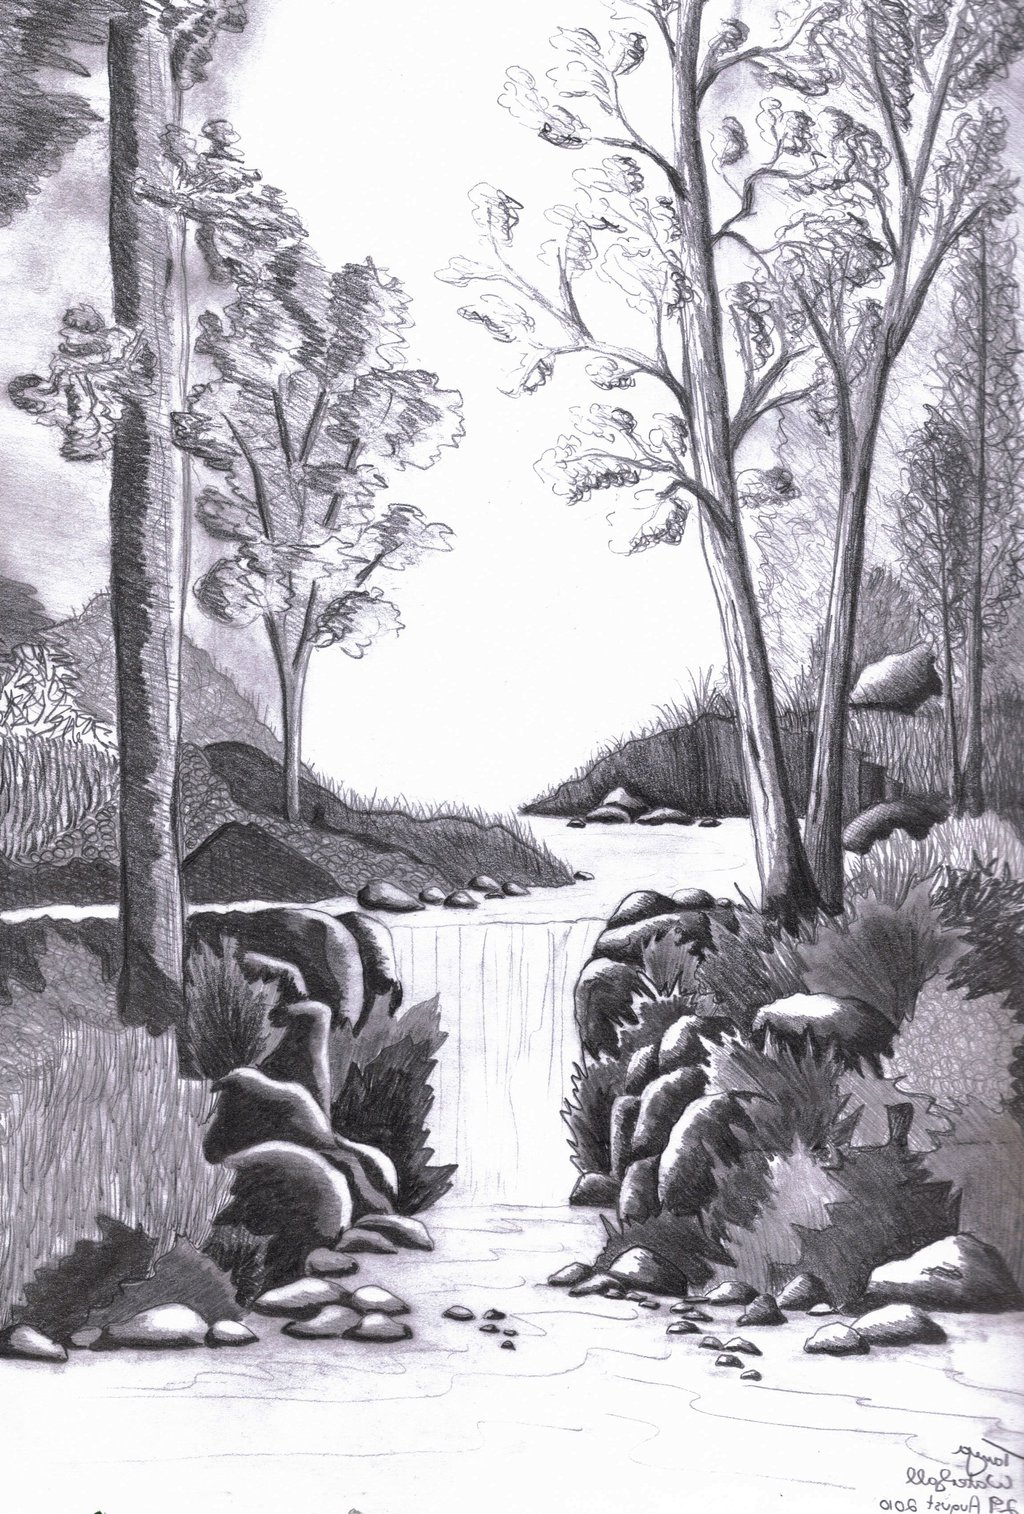 waterfall drawing reference